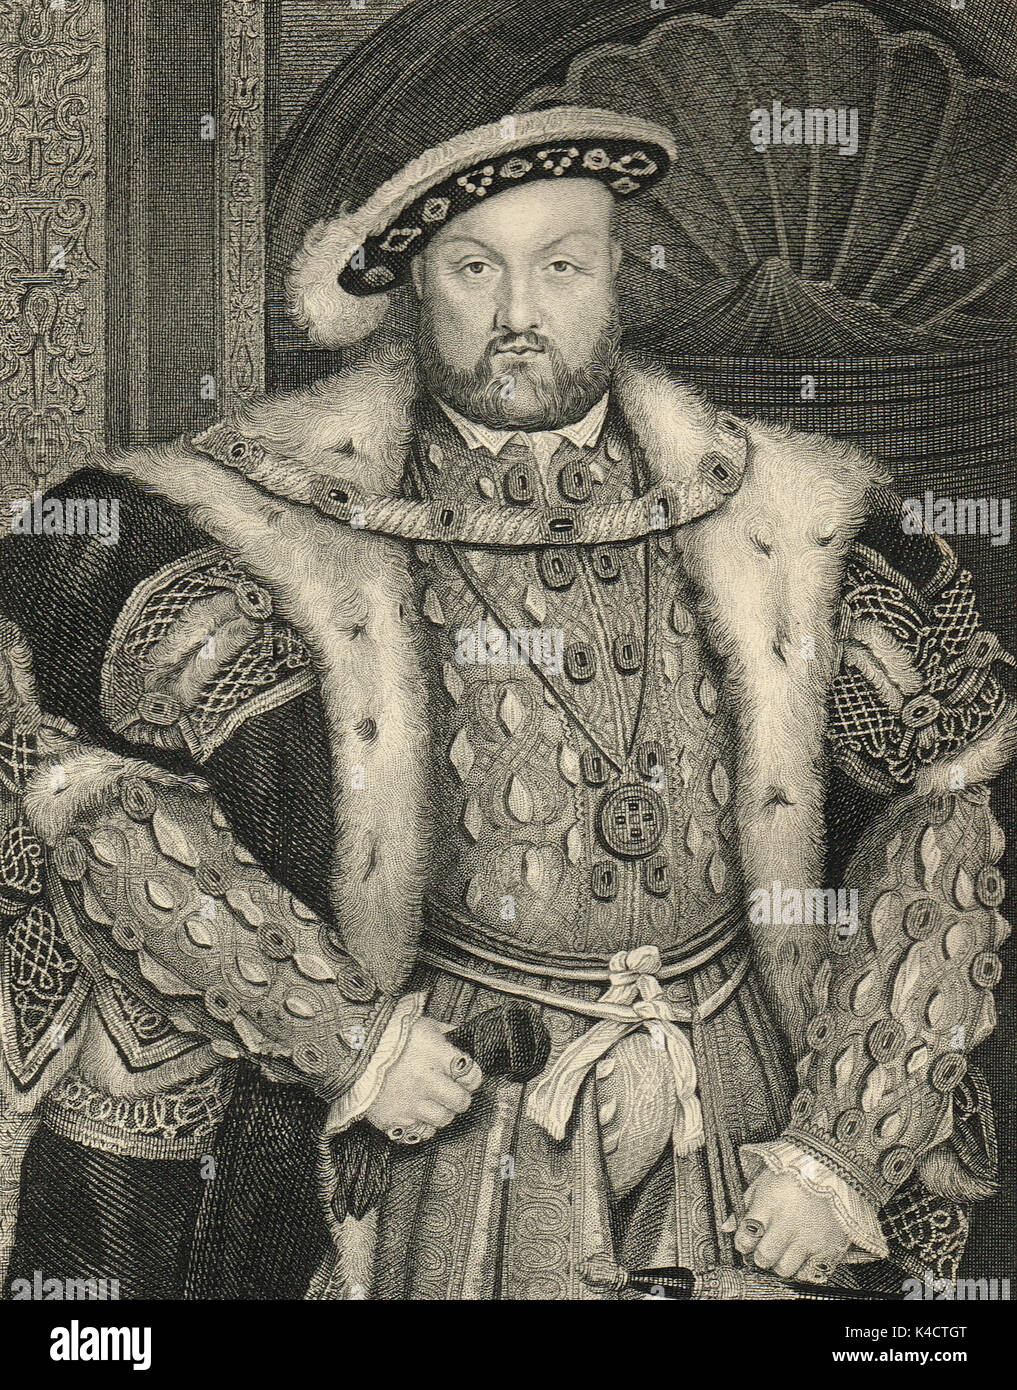 King Henry VIII of England, 1491-1547, reigned 1509-1547 Stock Photo